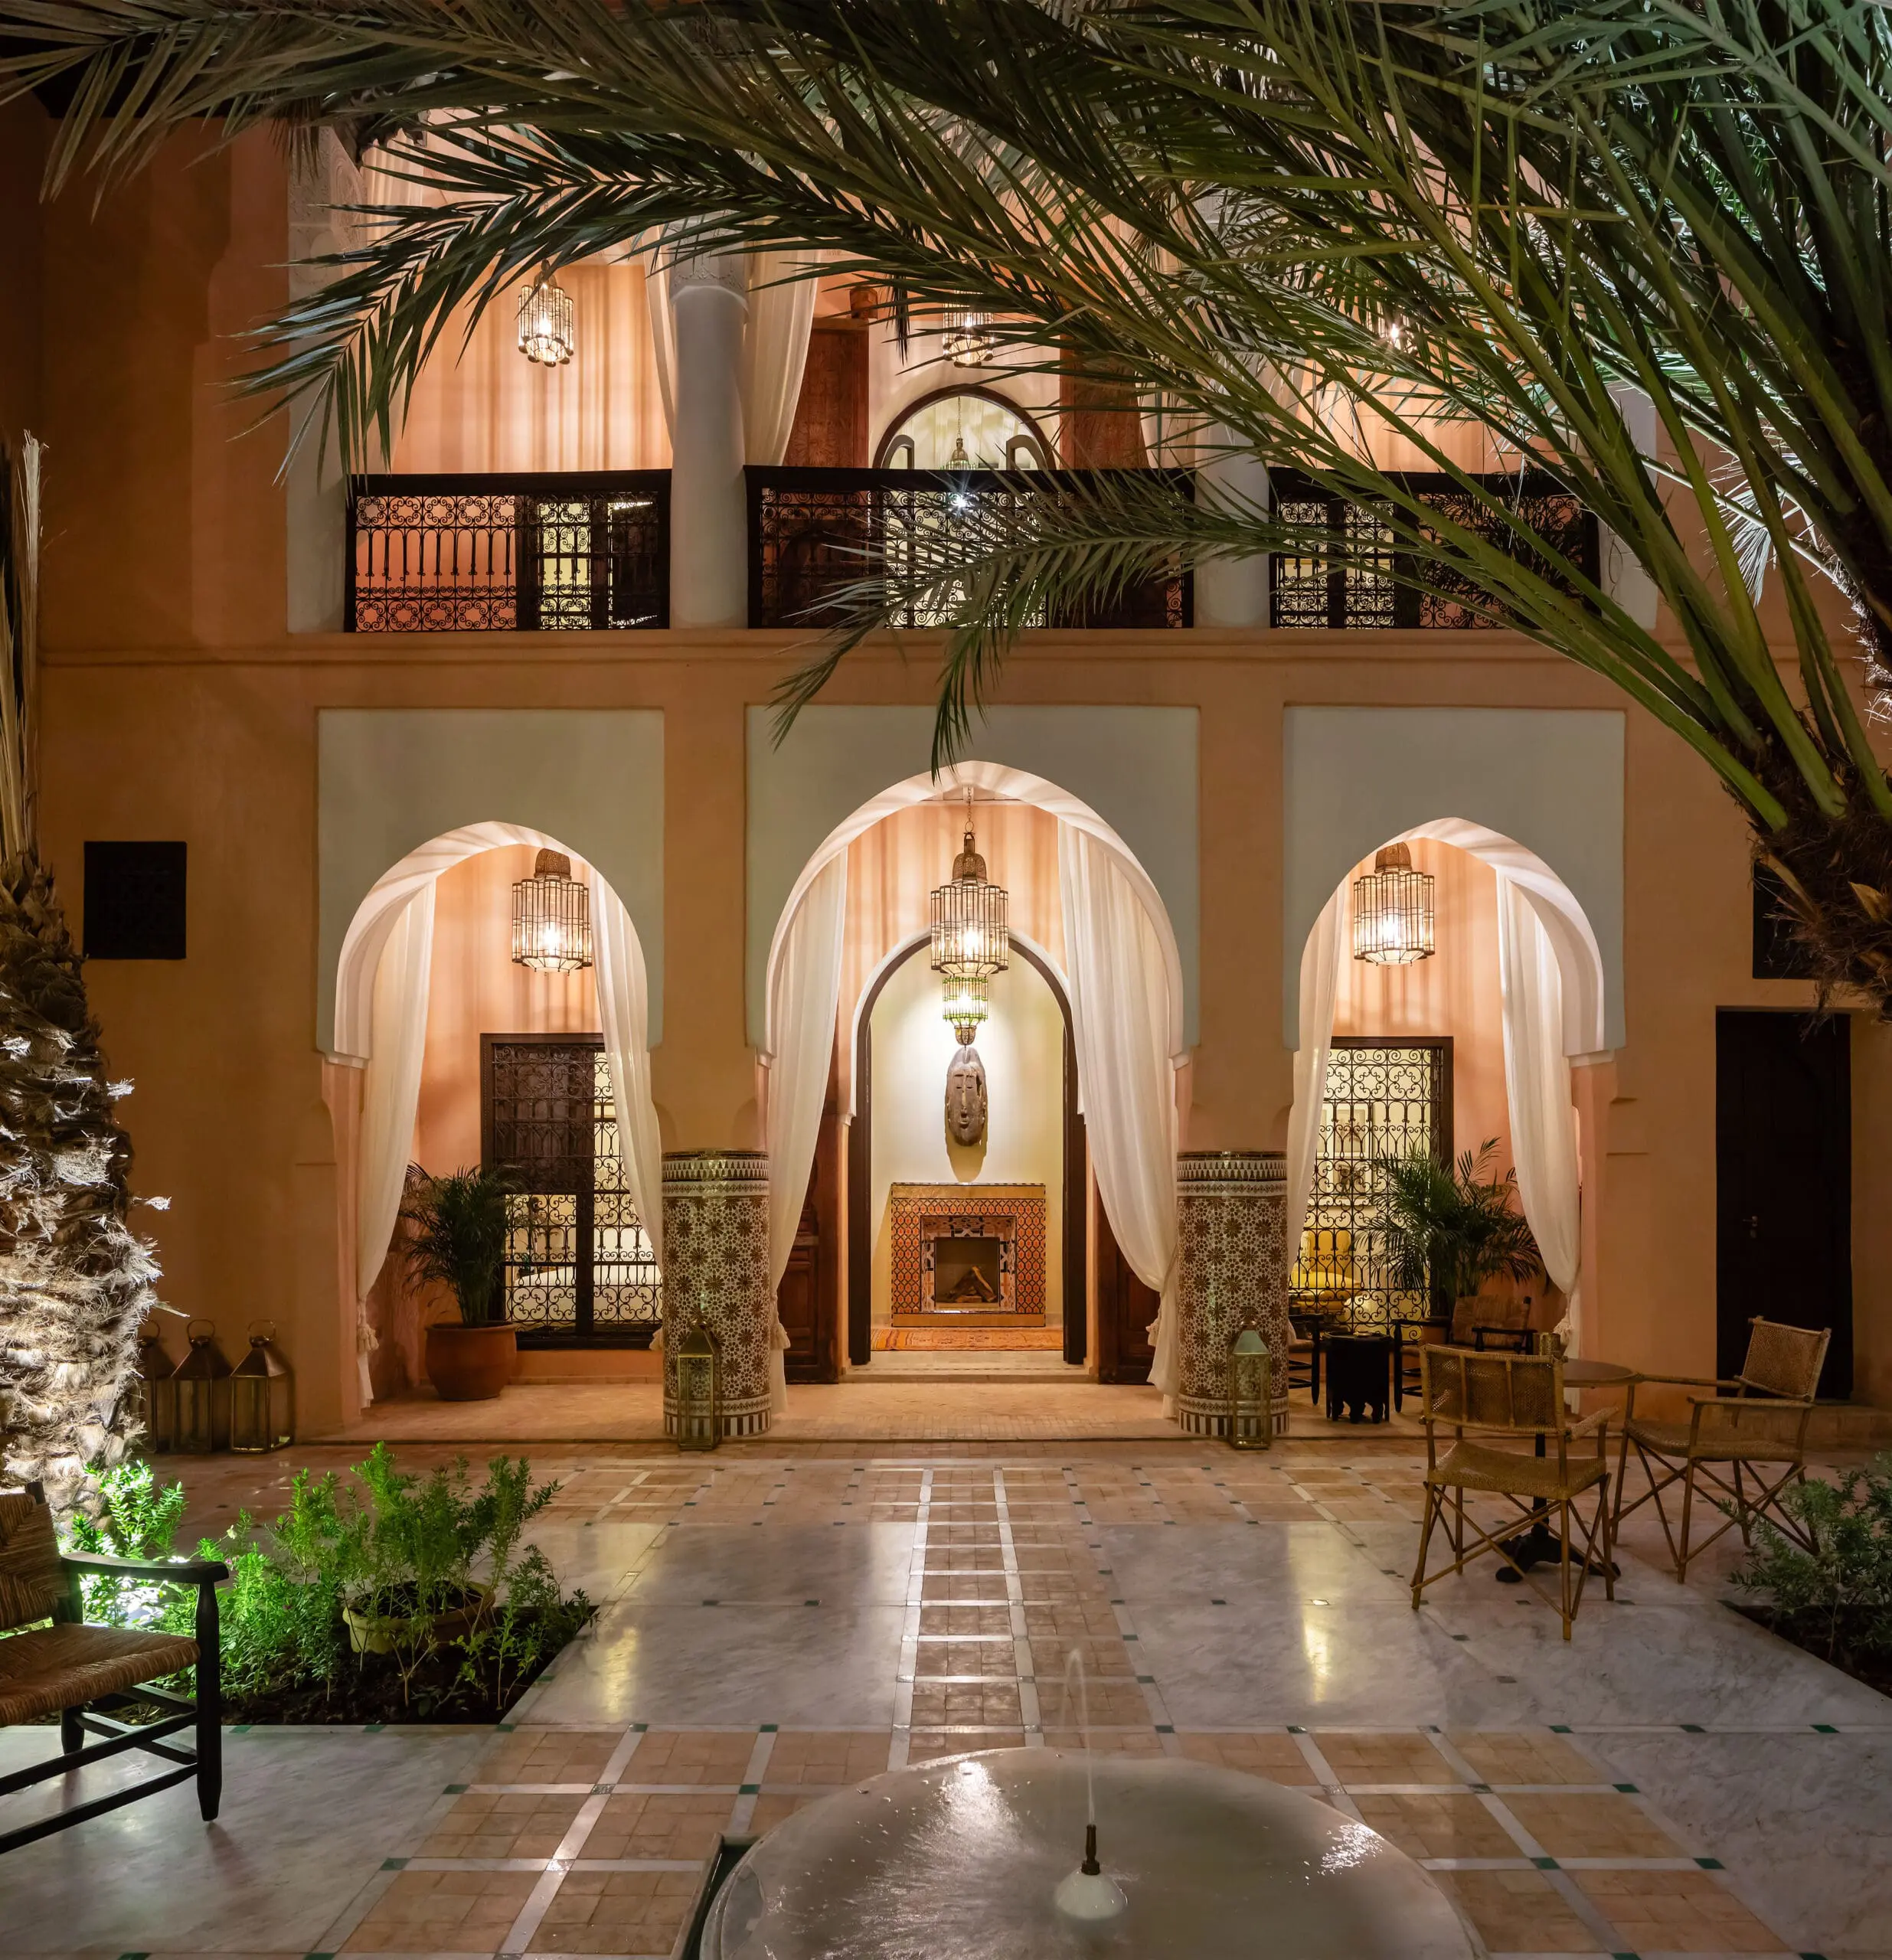 Recdi8 Living Interior Design - Marrakech Riad Restoration - Patio at Night with the MMUDDU Suite in the Background